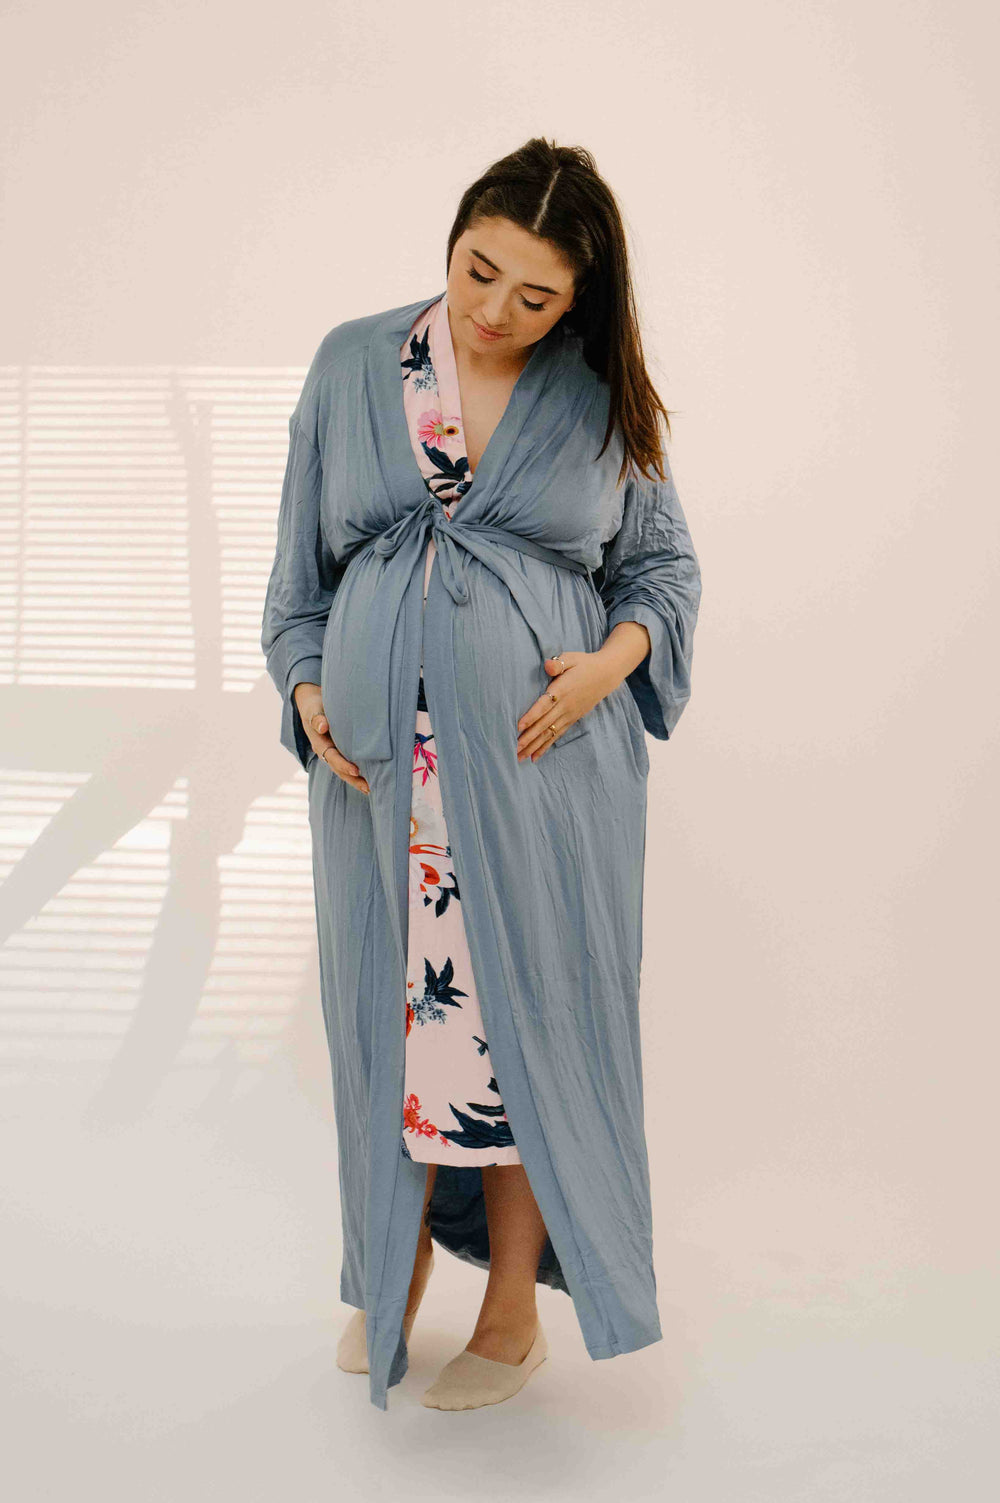 Robes in Periwinkle